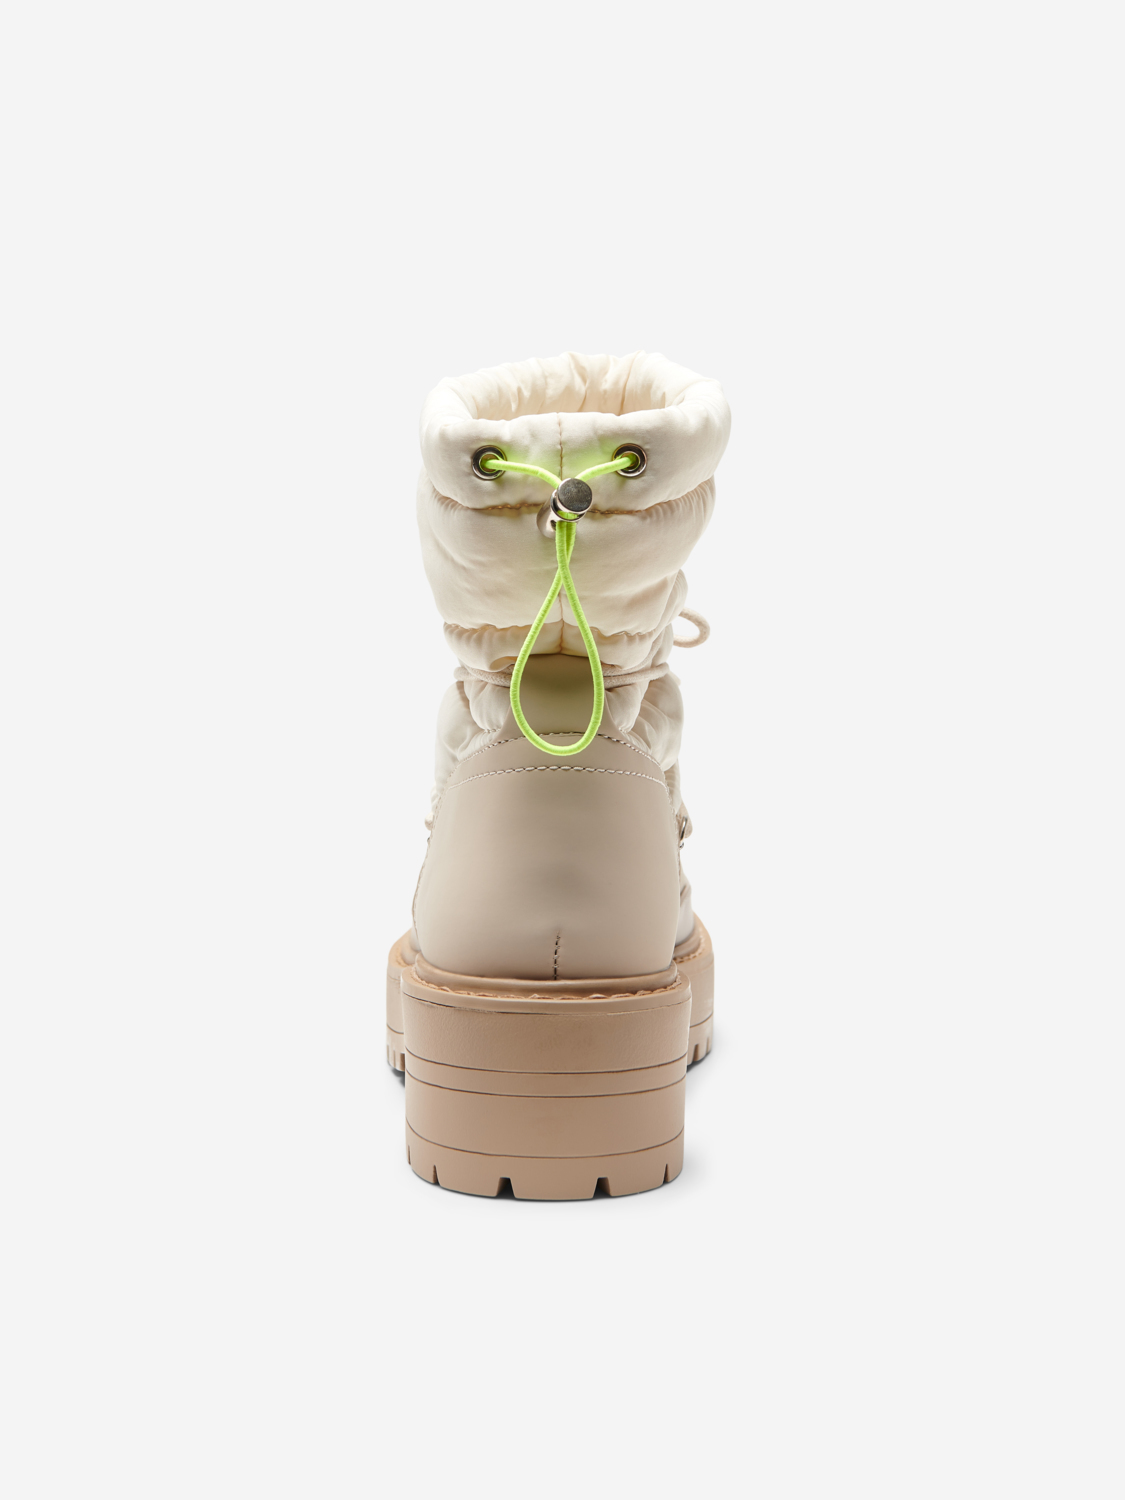 FINAL SALE - Brandie moon boots, WHITE, large